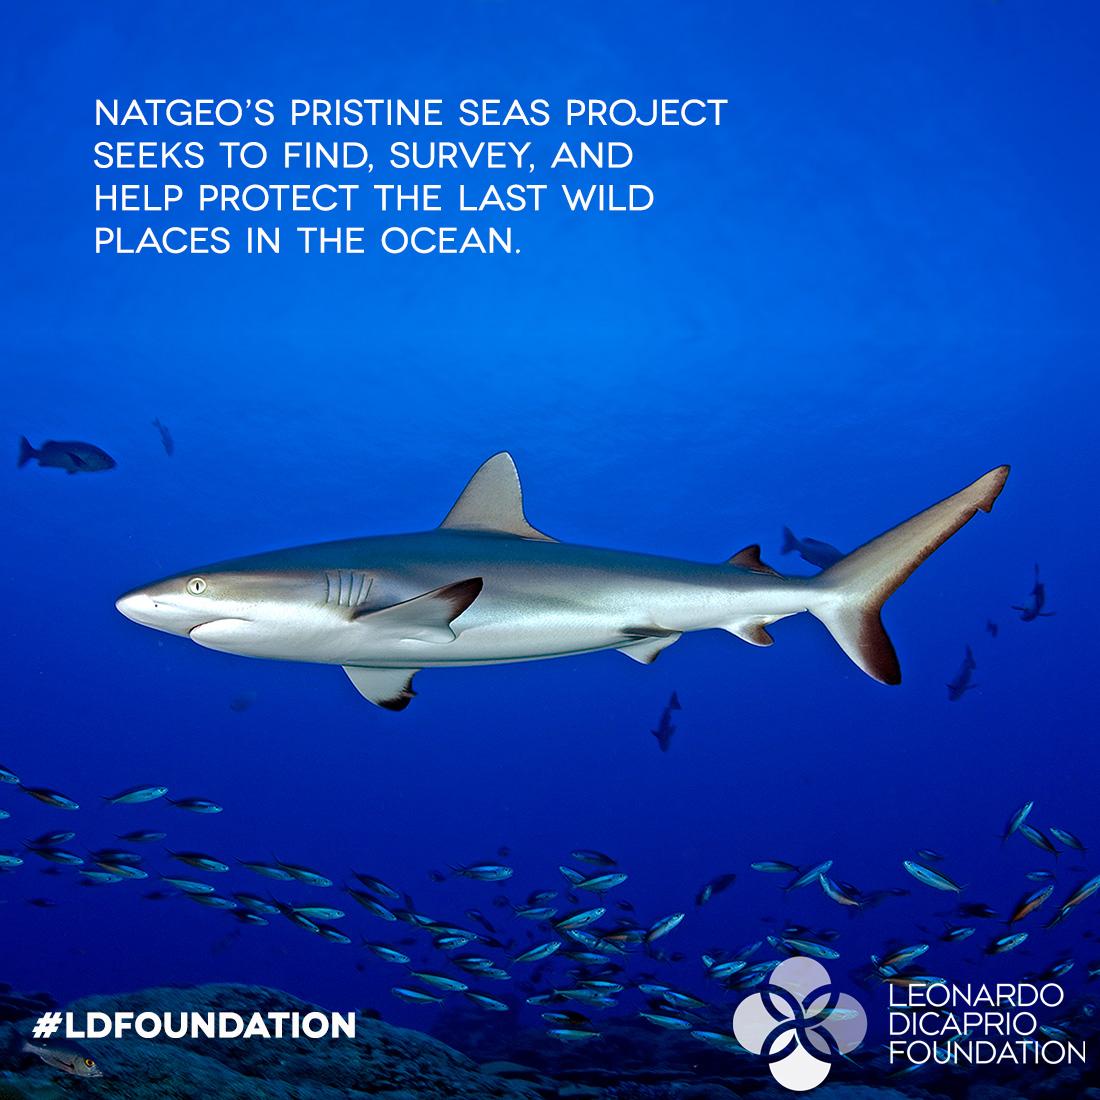 #LDFoundation is dedicated to protecting biodiversity in our oceans. @NatGeo #PristineSeasProject Photo: Enric Sala http://t.co/05GP5Col9p